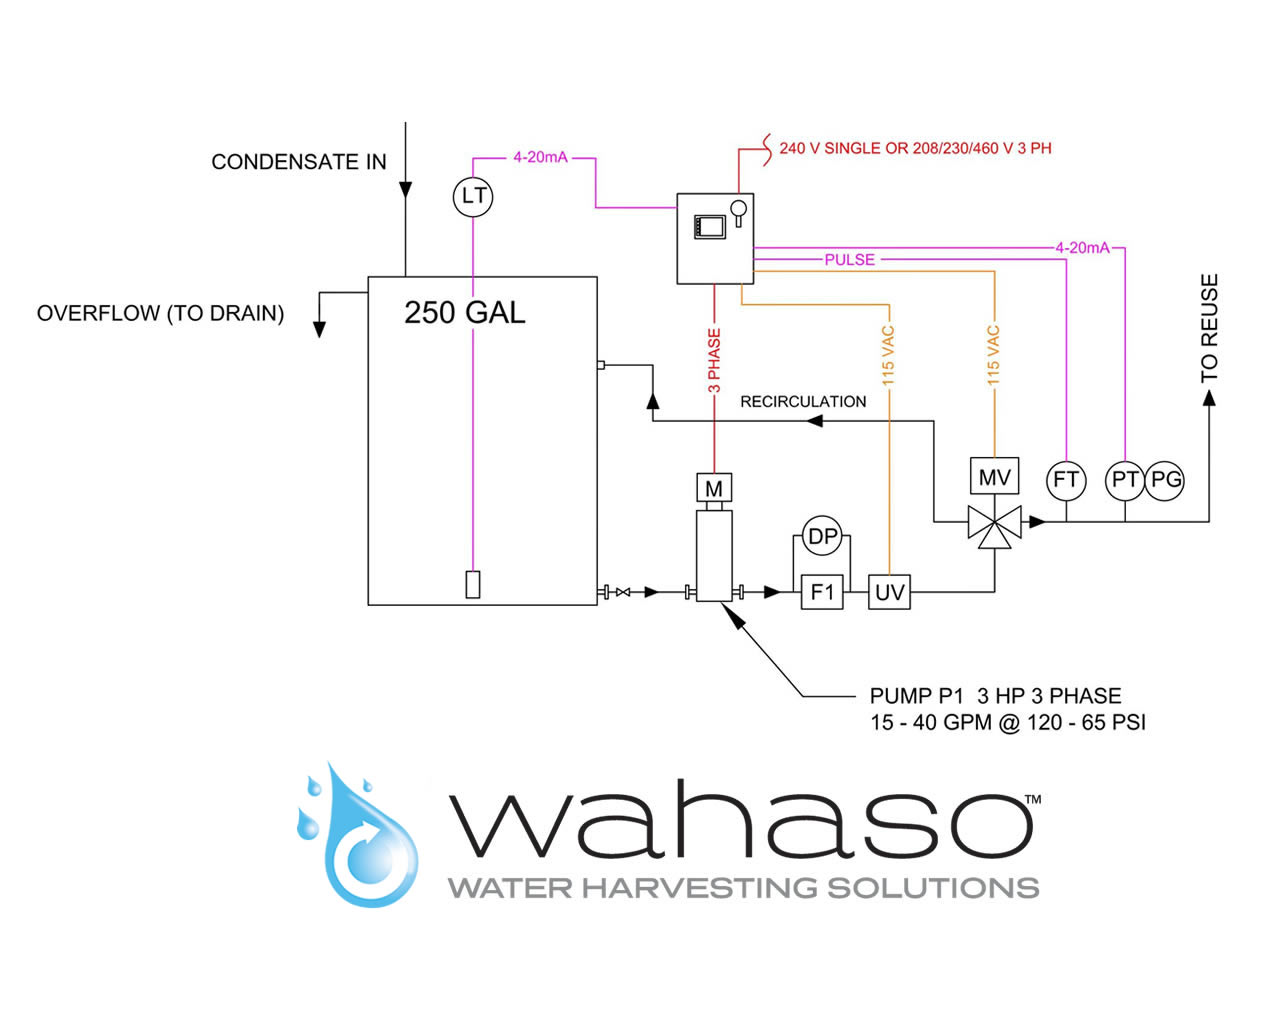 wahaso-commercial-best-condensate-systems-1